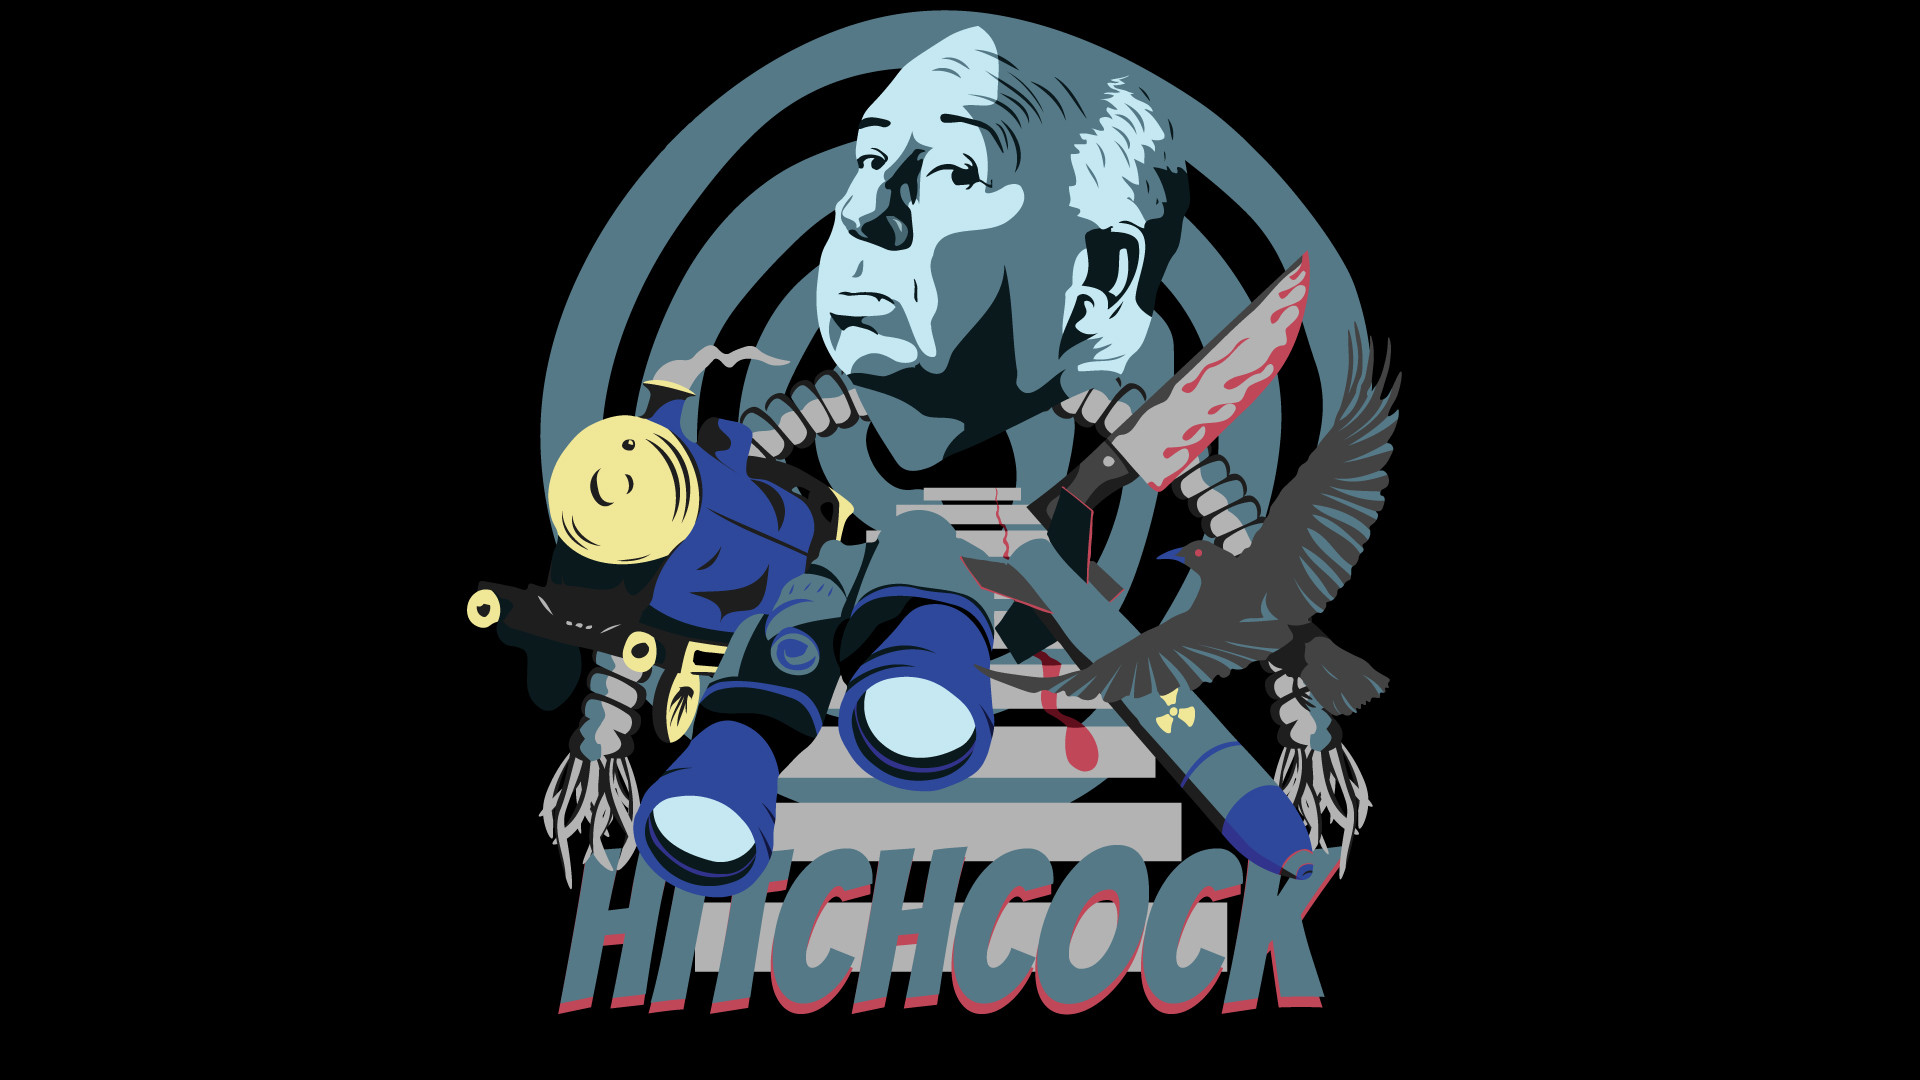 Alfred Hitchcock Wallpaper Image